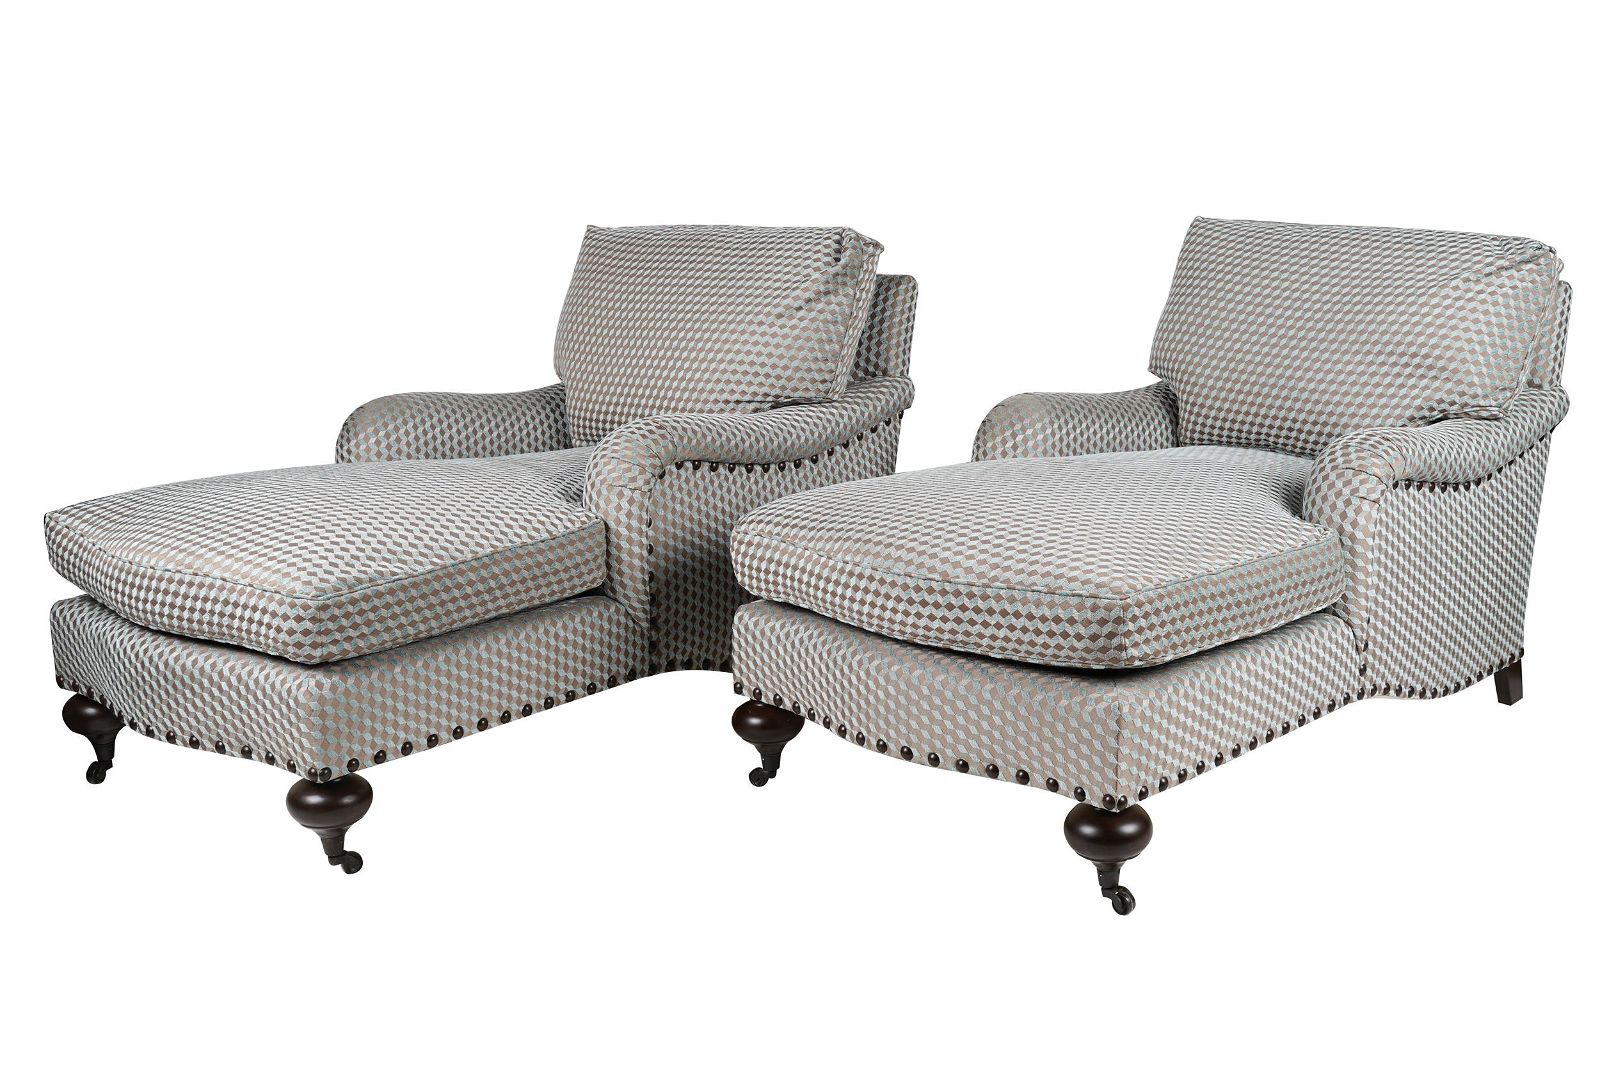 PAIR OF EBANISTA CHAISE LOUNGESwith 397274